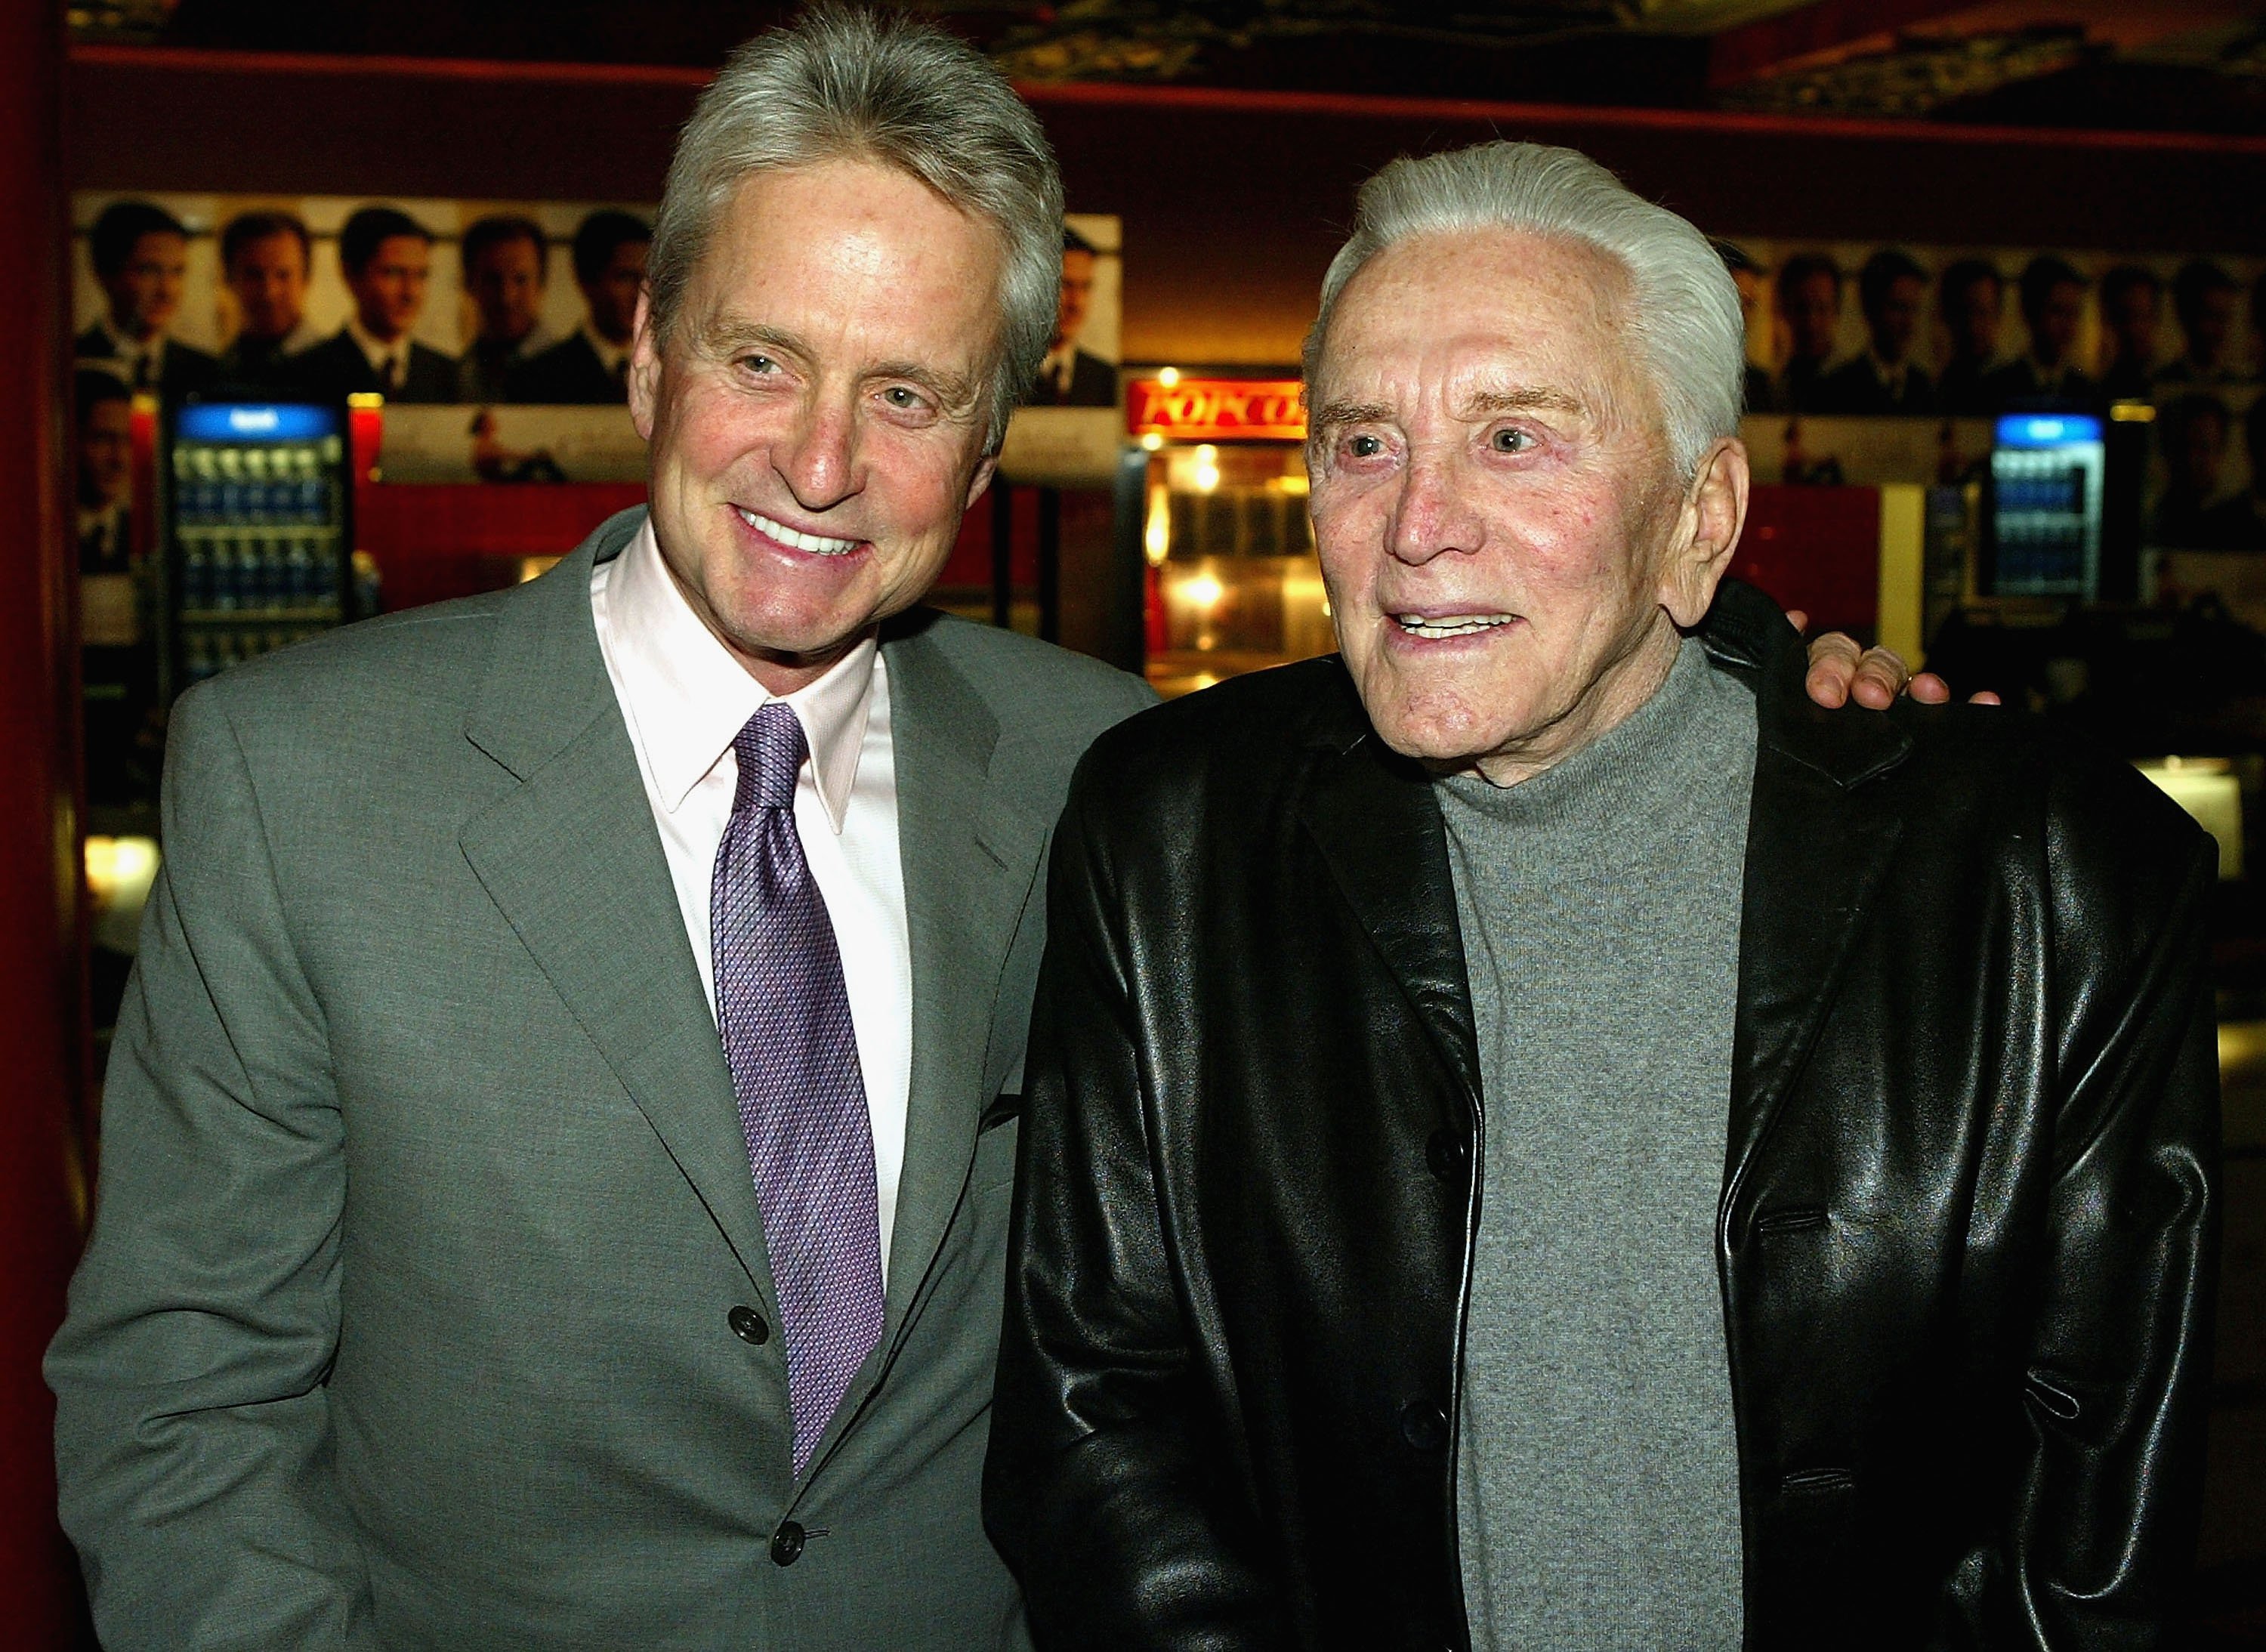 Actors Michael Douglas and Kirk Douglas attend the hand and footprints ceremony honoring Valenti at the Grauman's Chinese Theater December 6, 2004, in Hollywood, California. | Source: Getty Images.